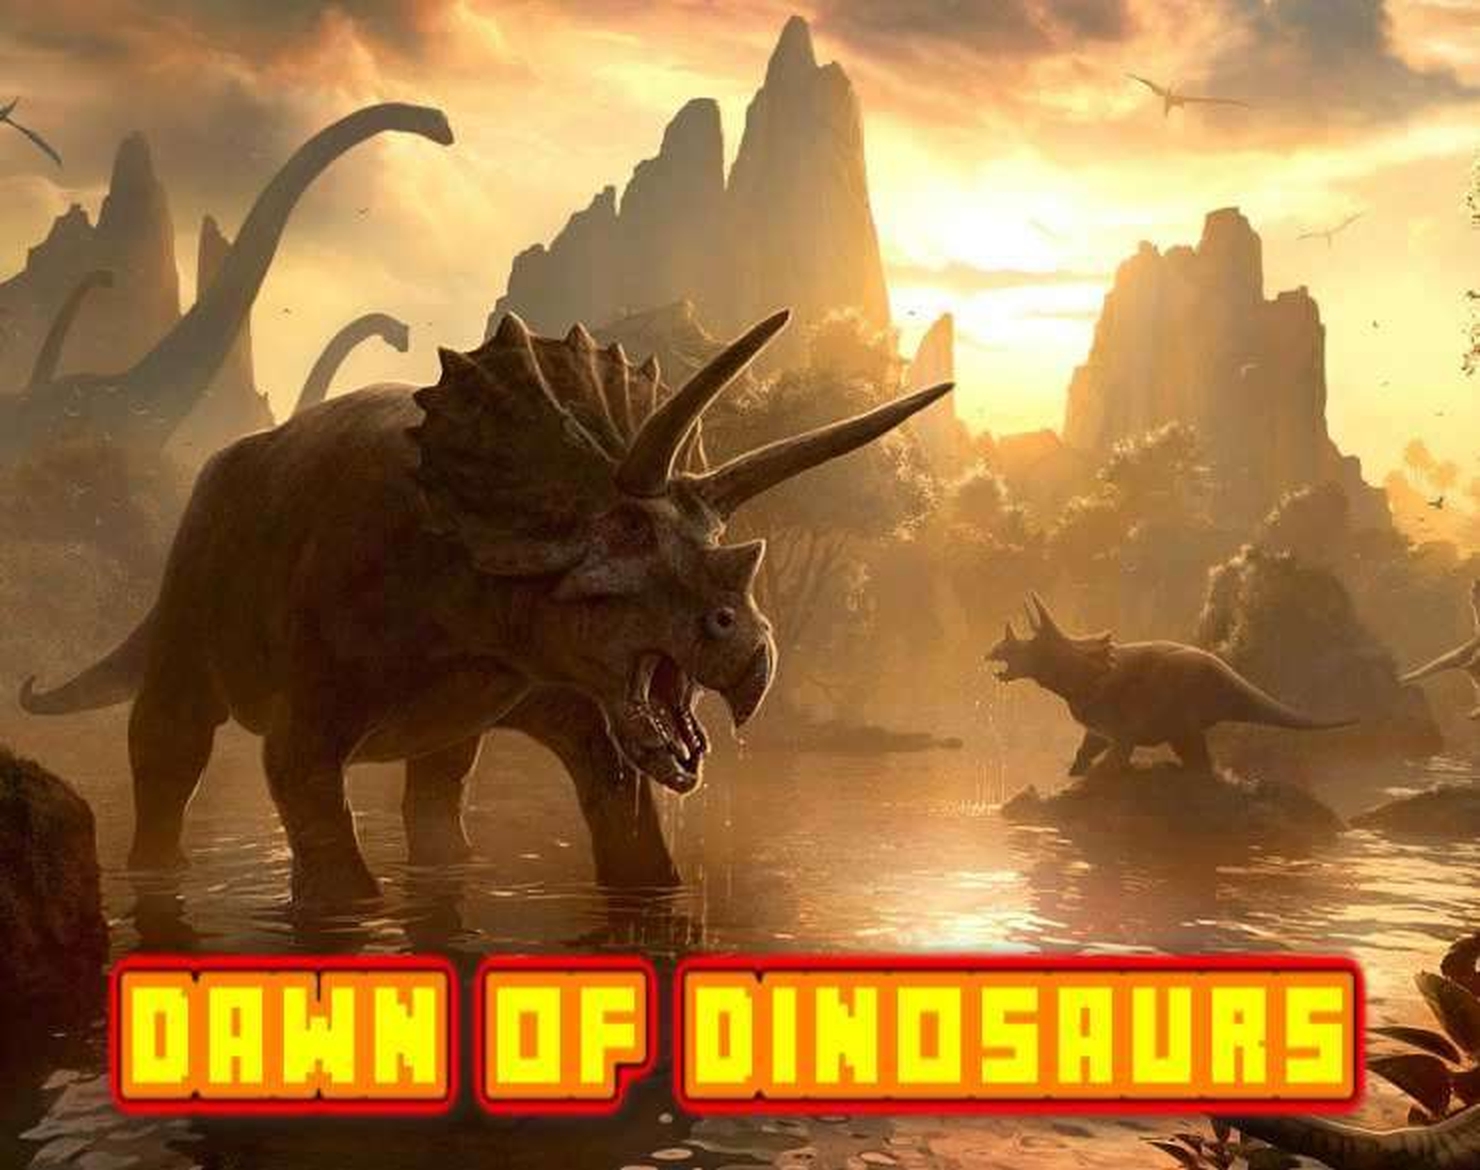 Dawn Of The Dinosaurs demo